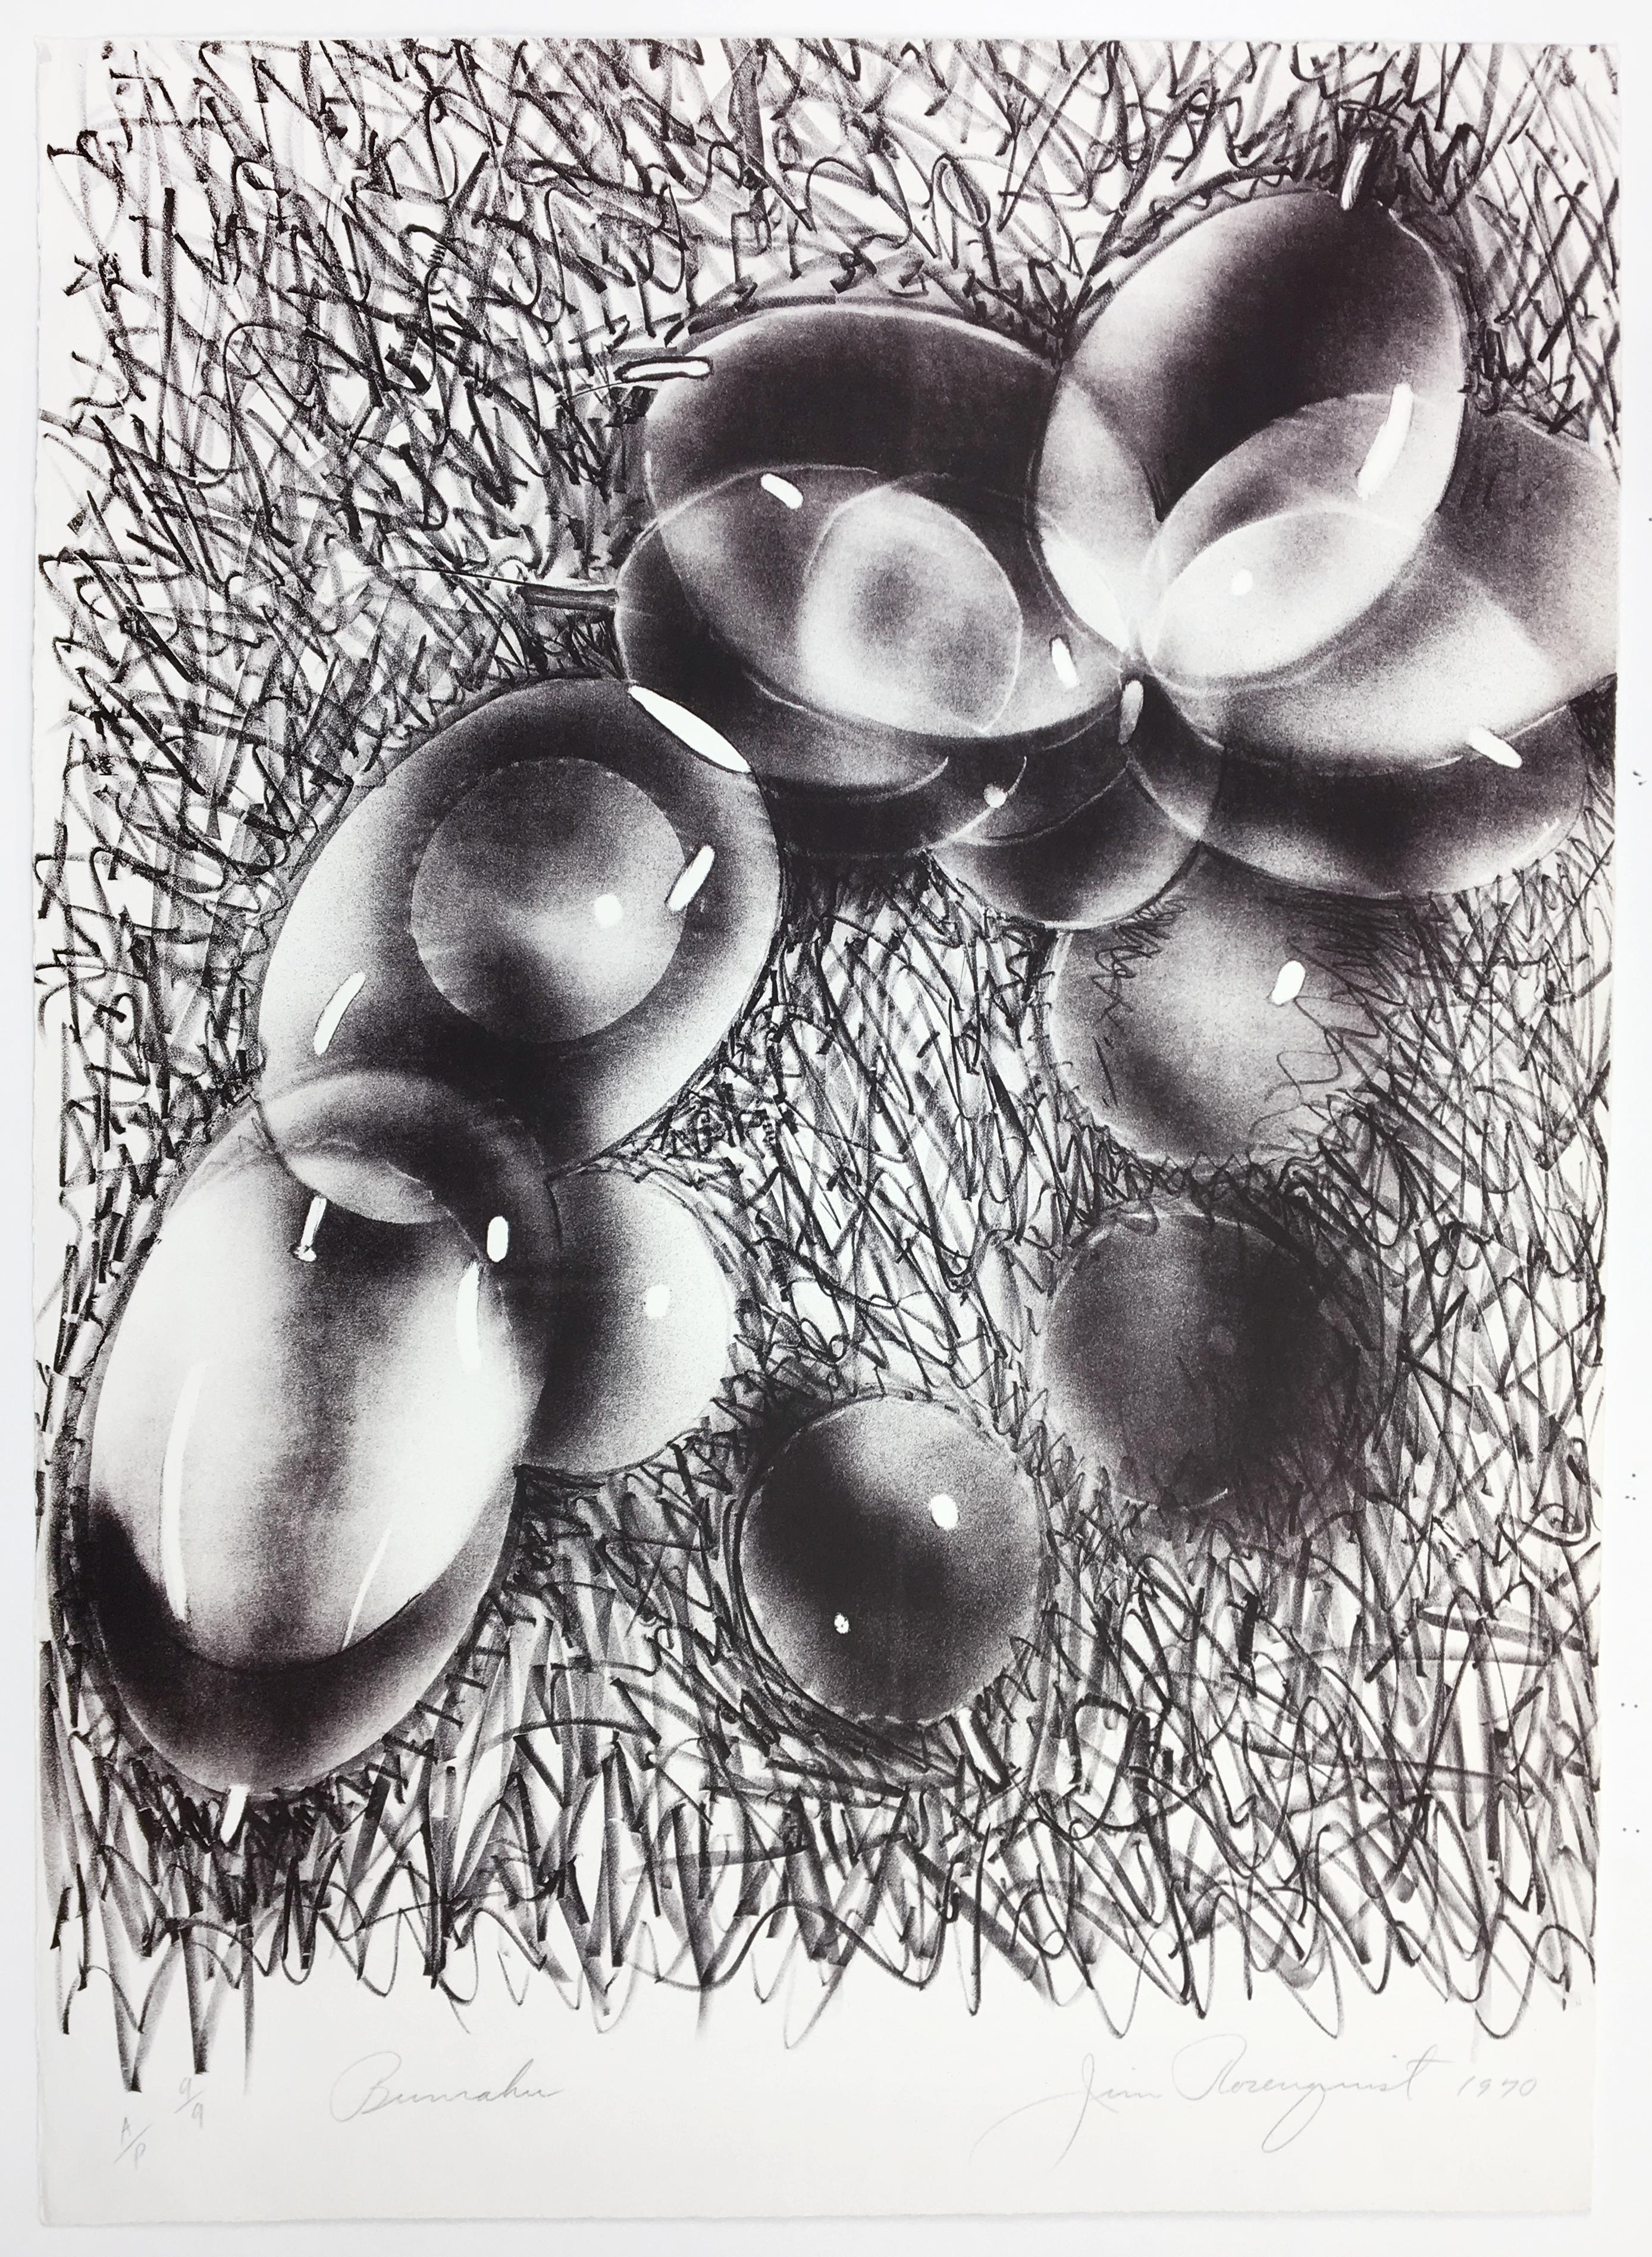 This abstract monochrome print portrays large, shiny dark purple bubbles that cascade over a scribbled, dense background. The sense of movement suggests Rosenquist was influenced by the dynamic performances of Bunraku. Bunraku is a form of